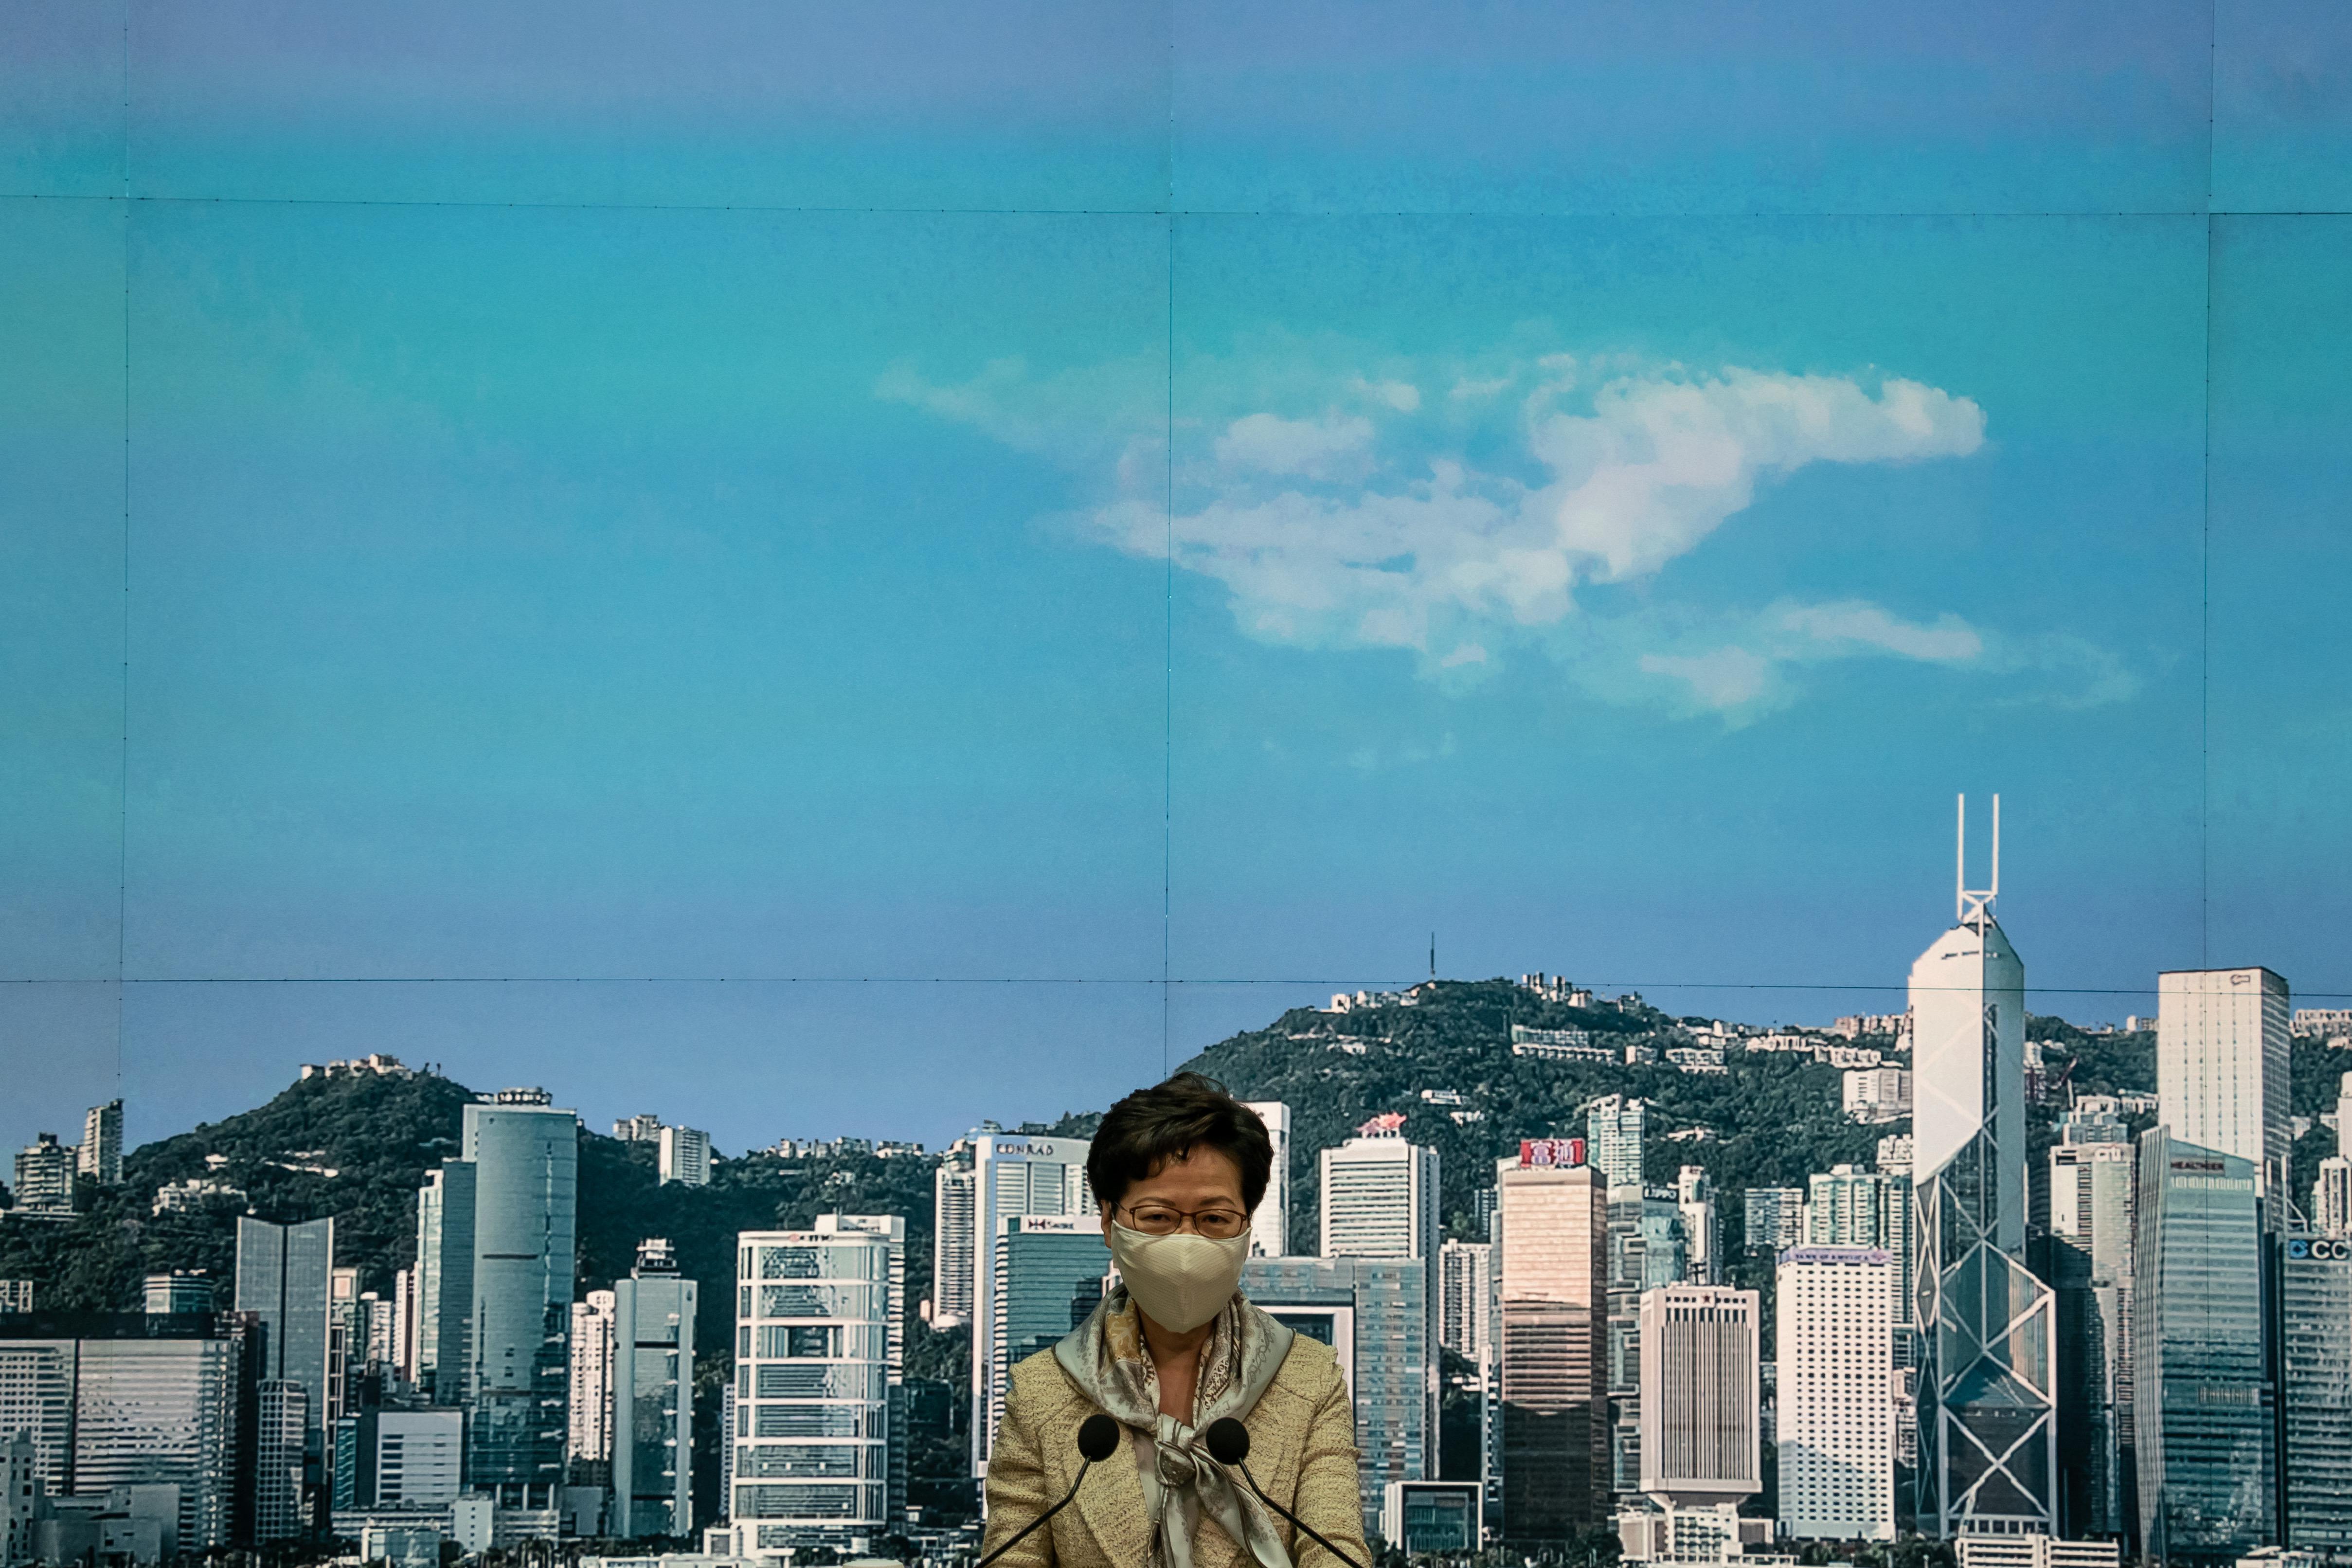 Carrie Lam is seen wearing a face mask. A city skyline is seen in the background.